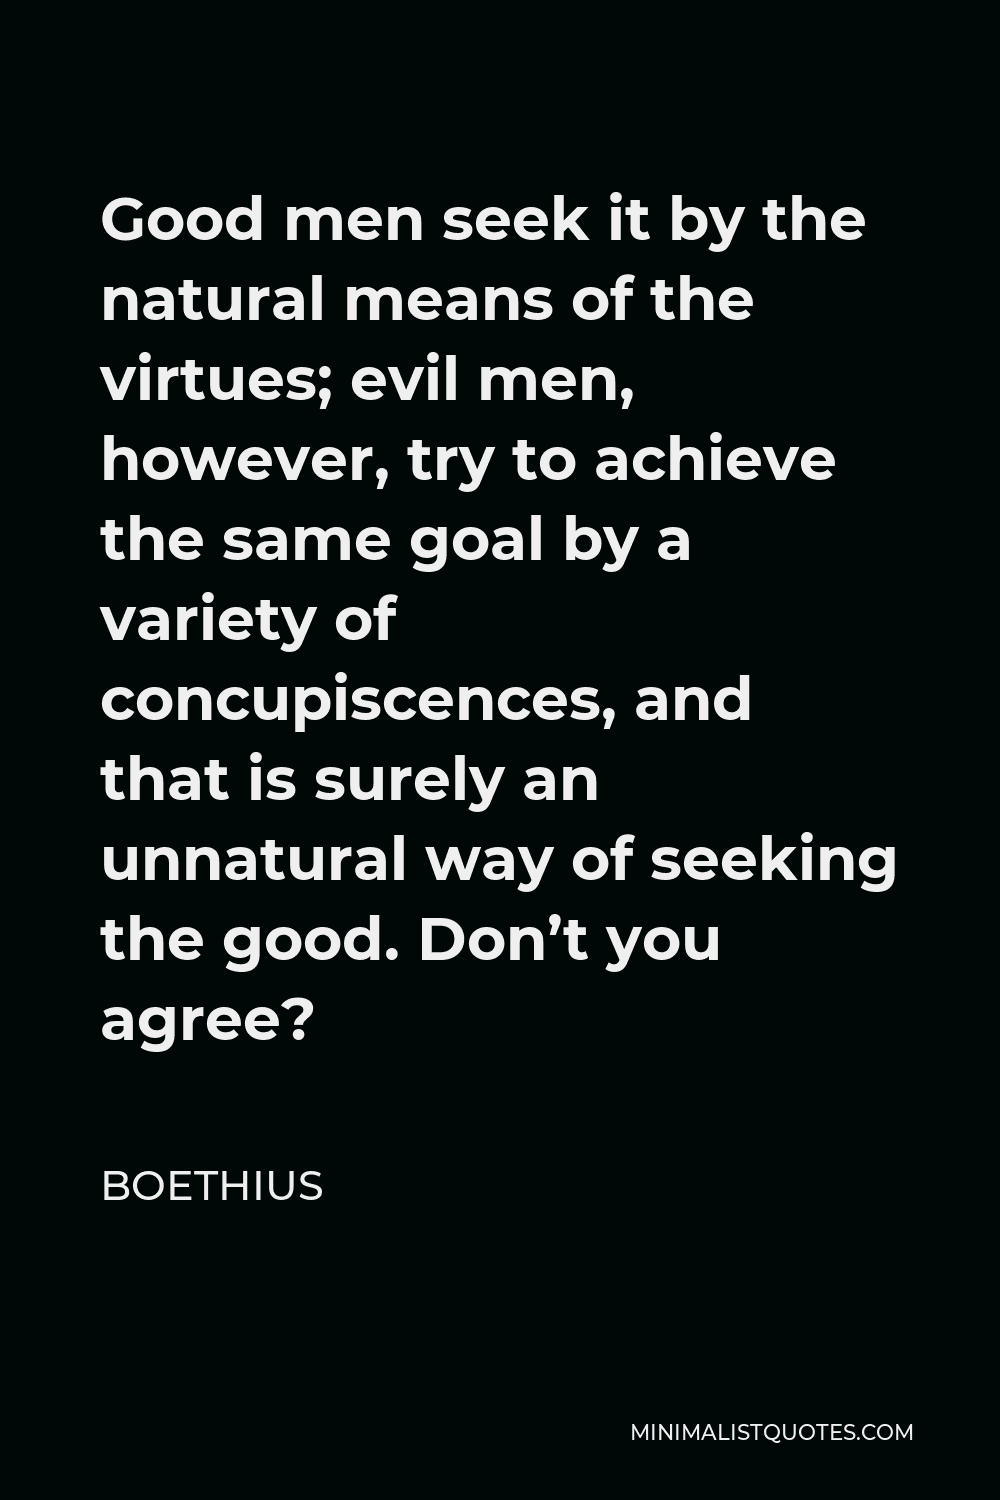 Boethius Quote - Good men seek it by the natural means of the virtues; evil men, however, try to achieve the same goal by a variety of concupiscences, and that is surely an unnatural way of seeking the good. Don’t you agree?